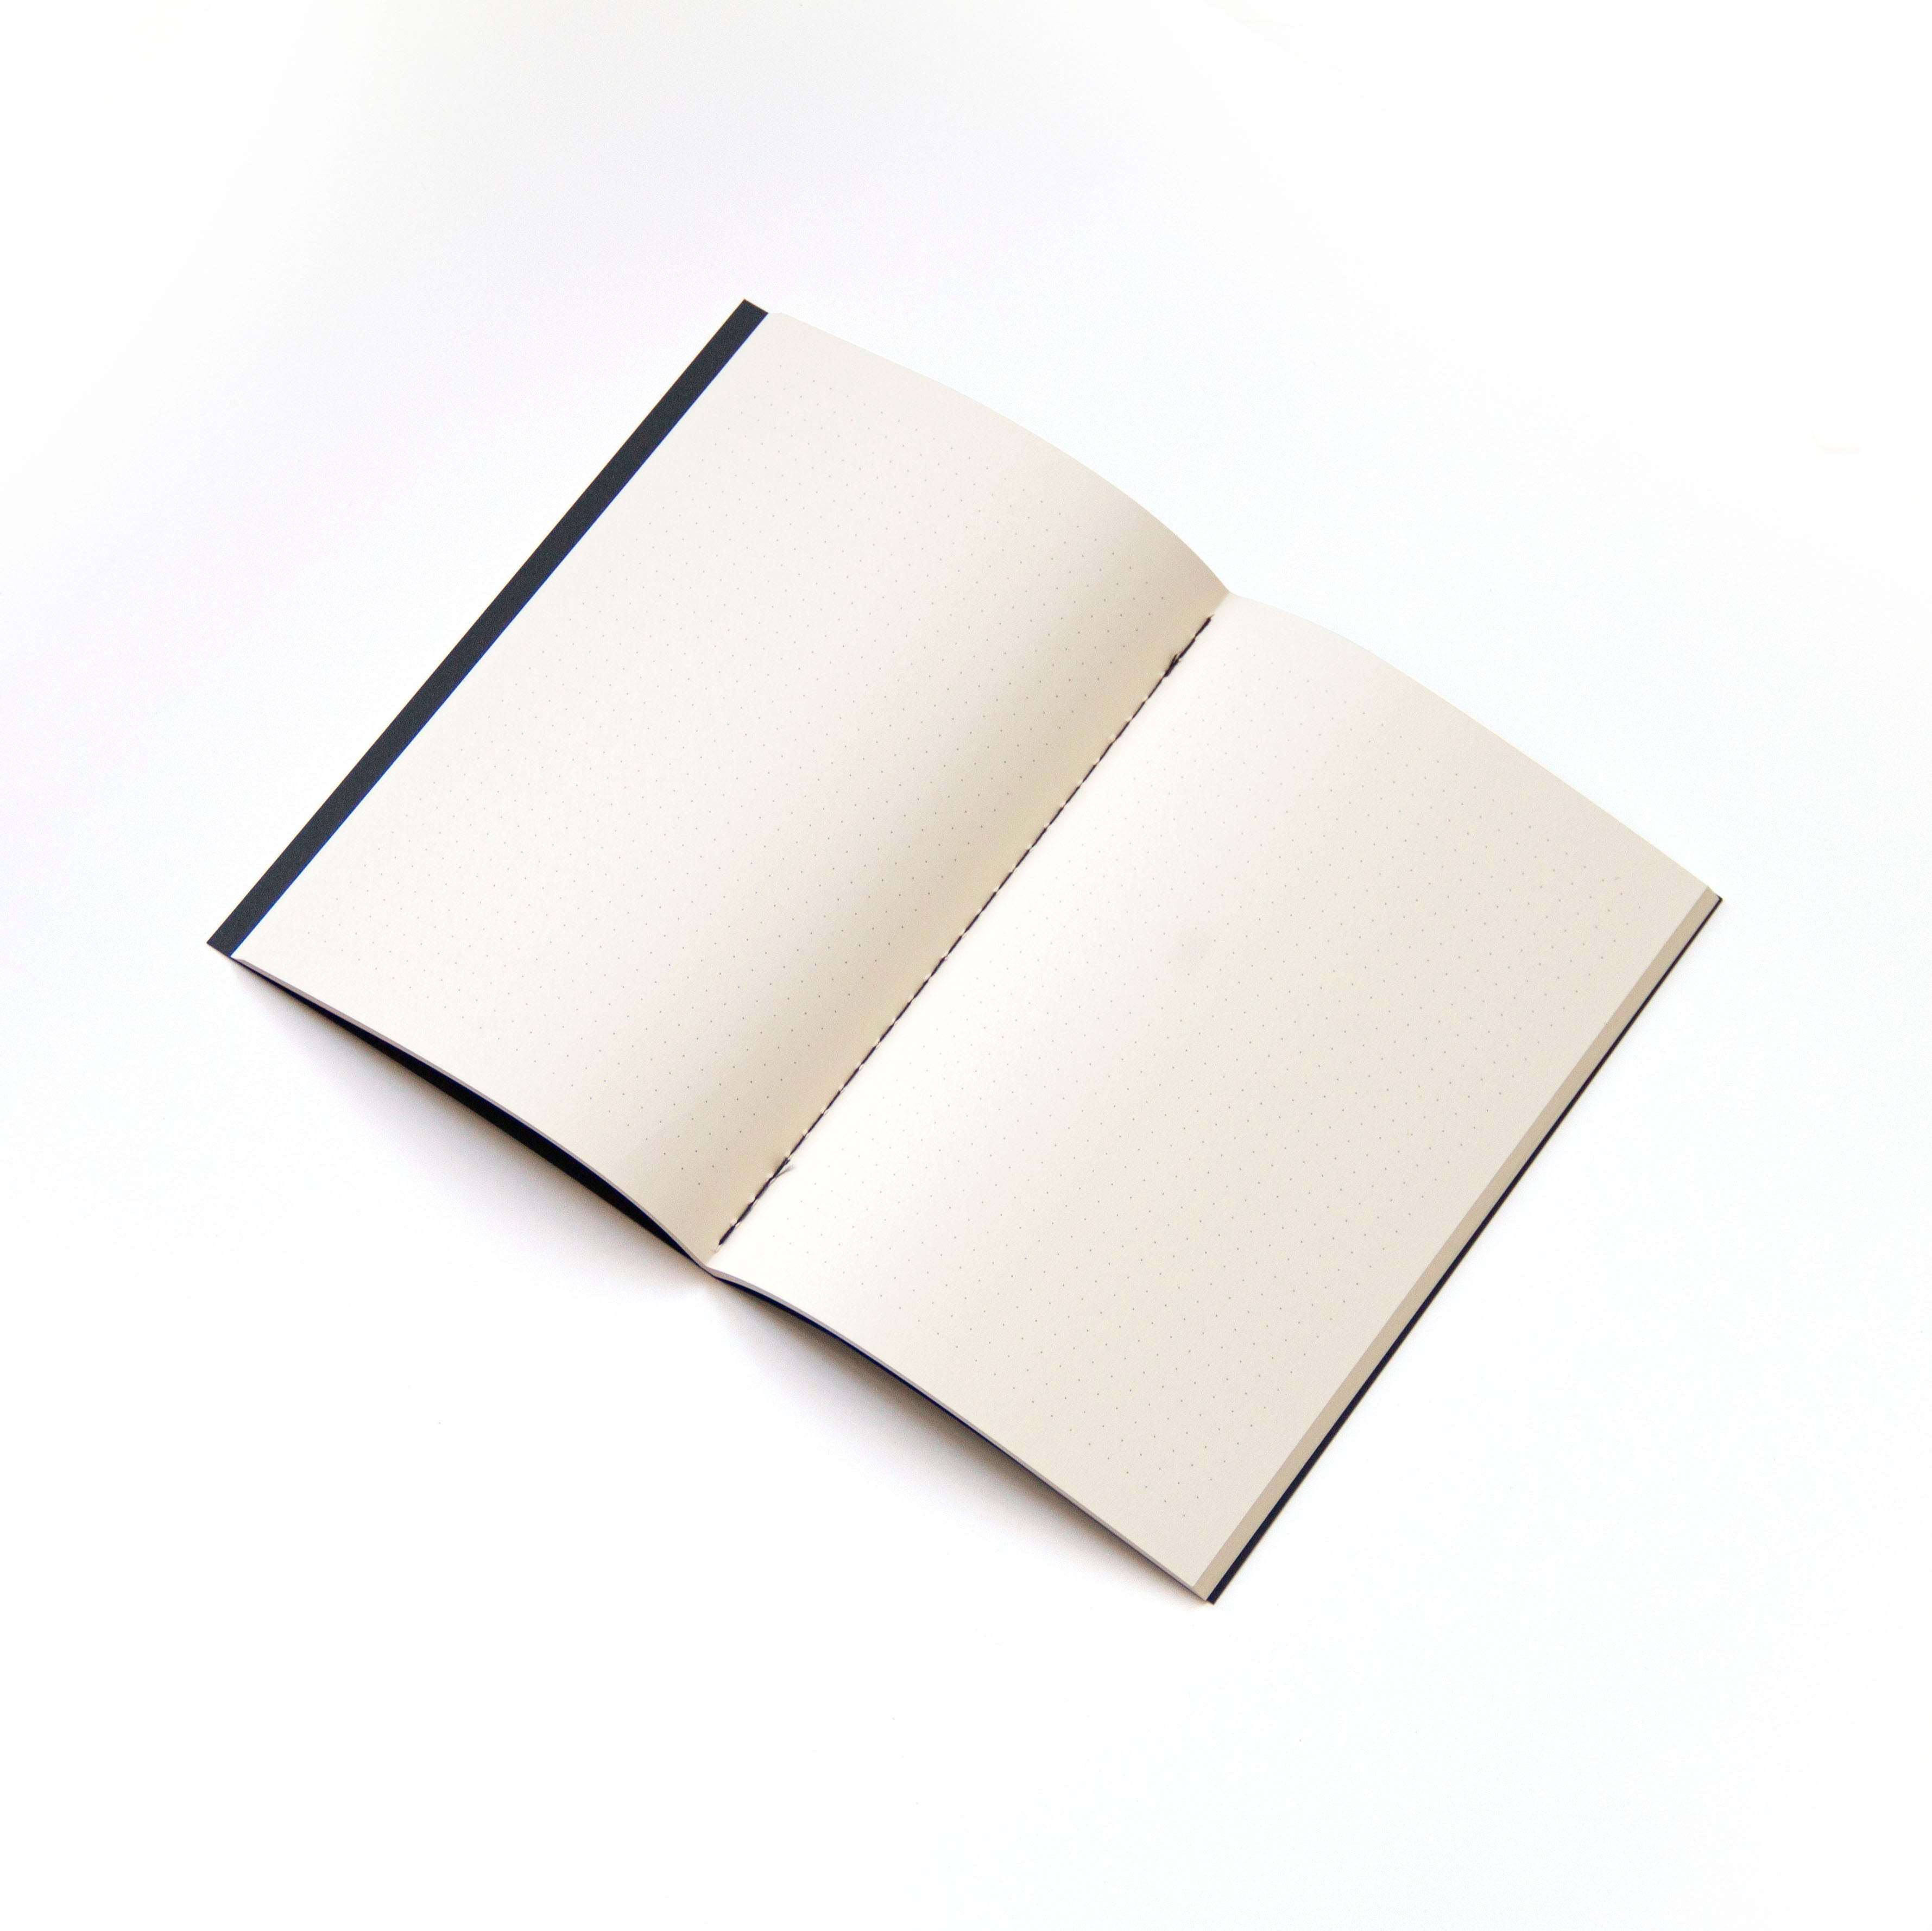 OCTÀGON DESIGN | Open "Adult content" dotted notebook. Binding with black thread.